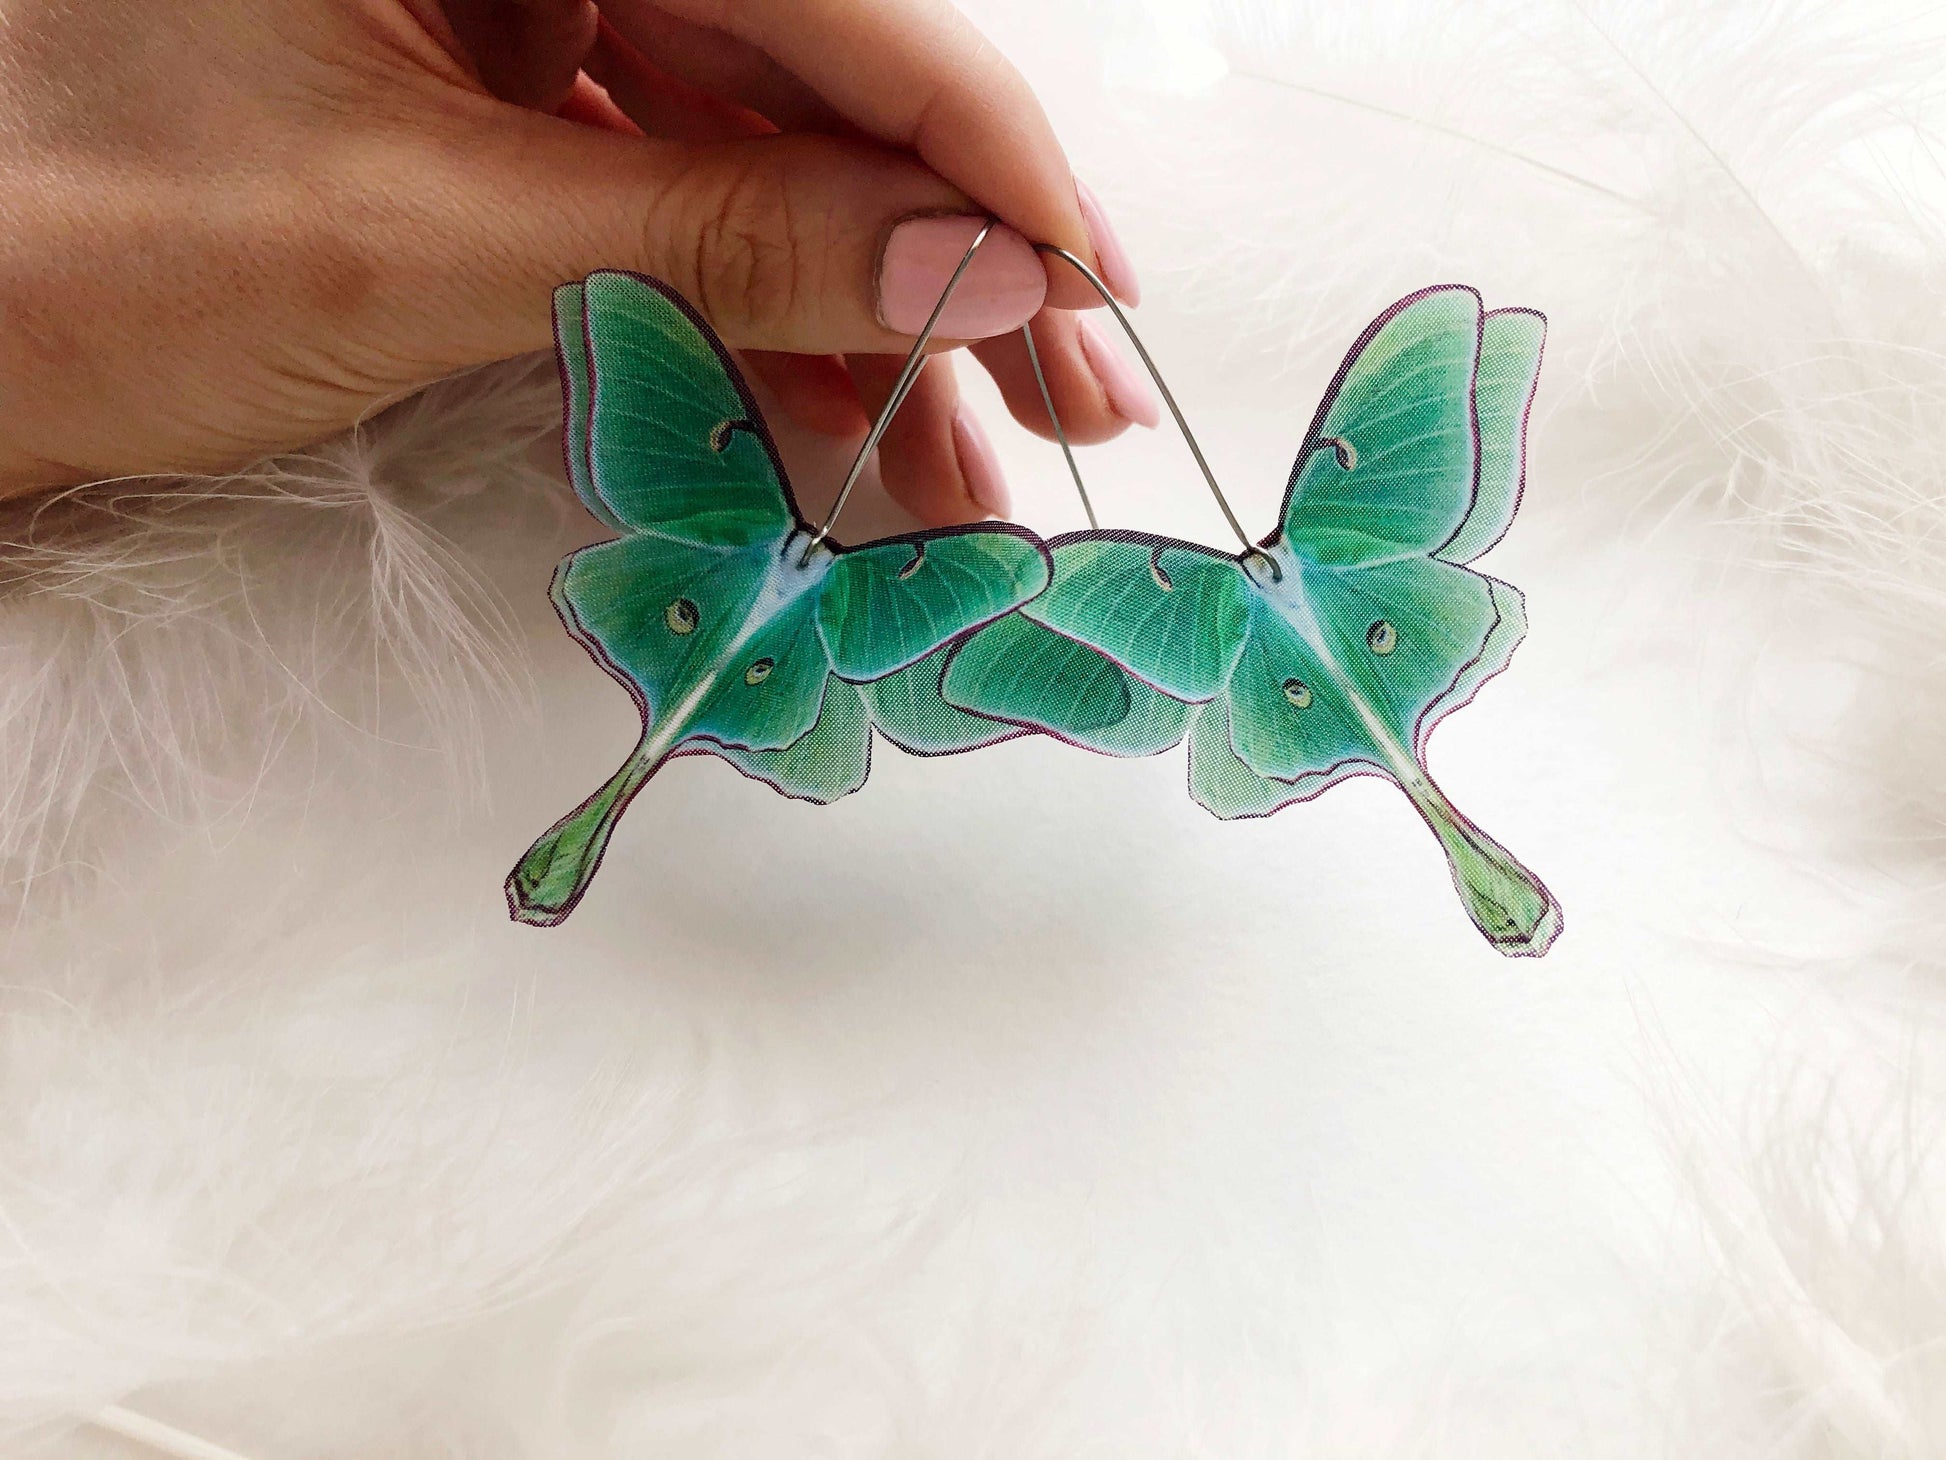 Handmade Luna Moth earrings with gift box, cute gift for her